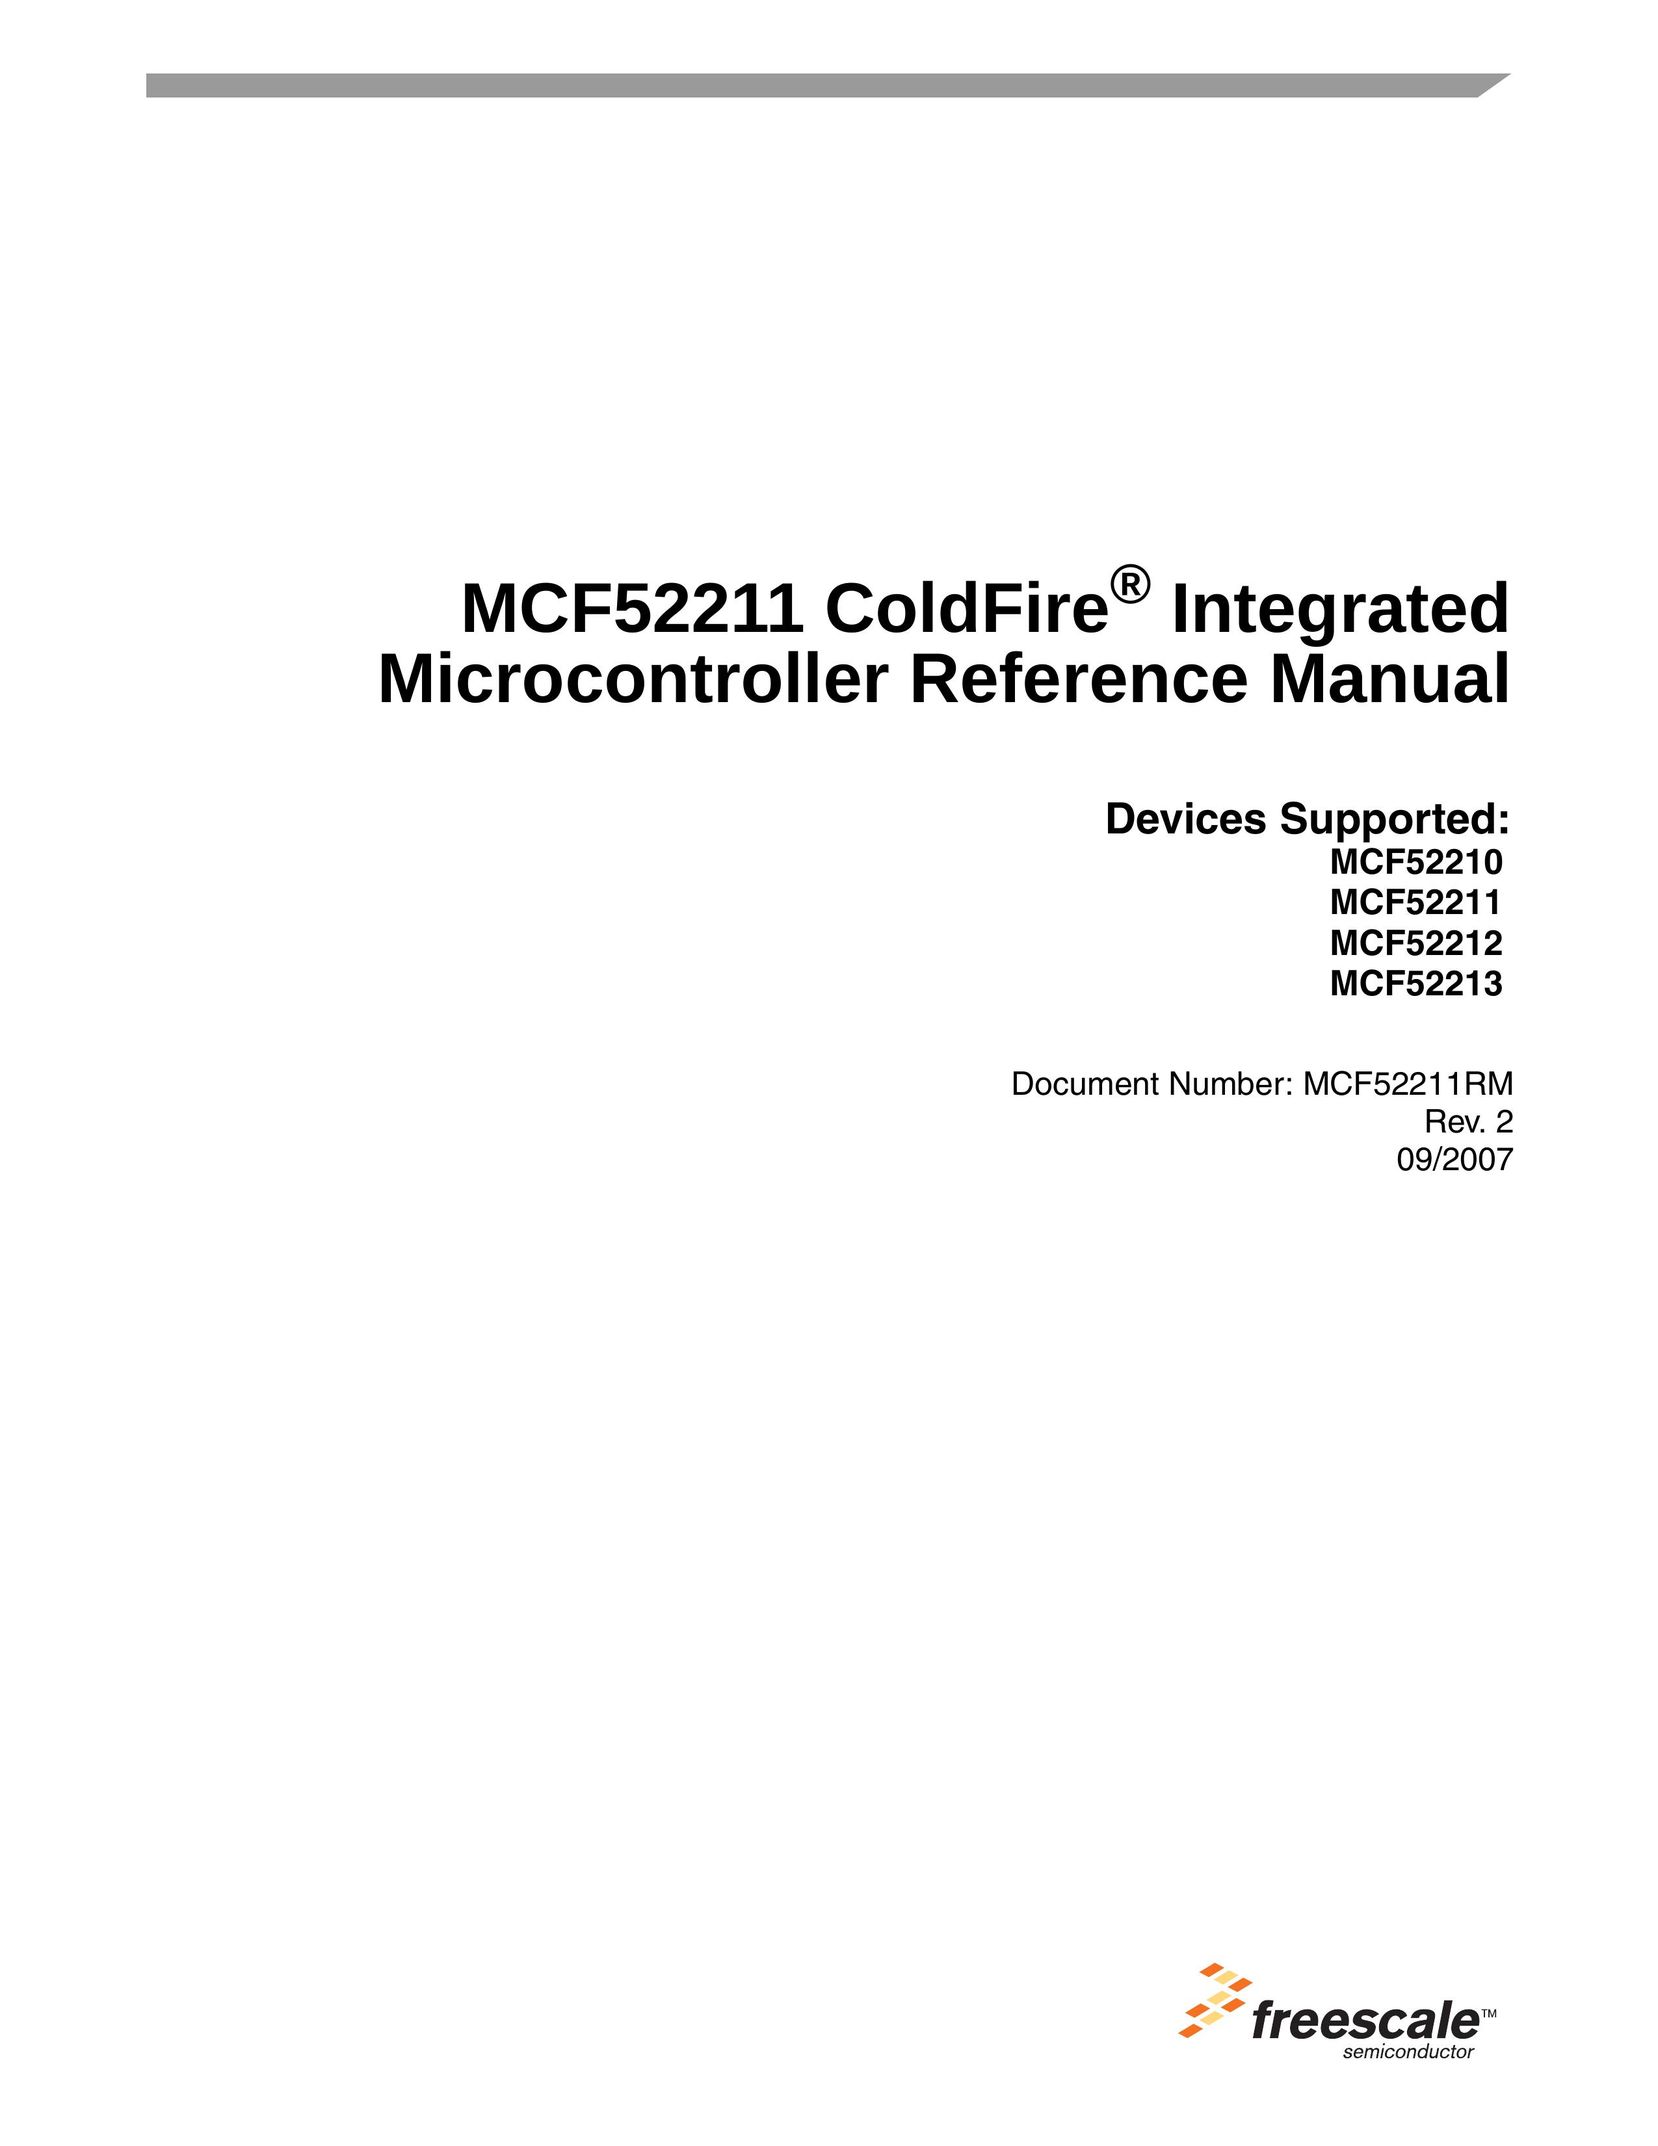 Freescale Semiconductor MCF52213 Network Card User Manual